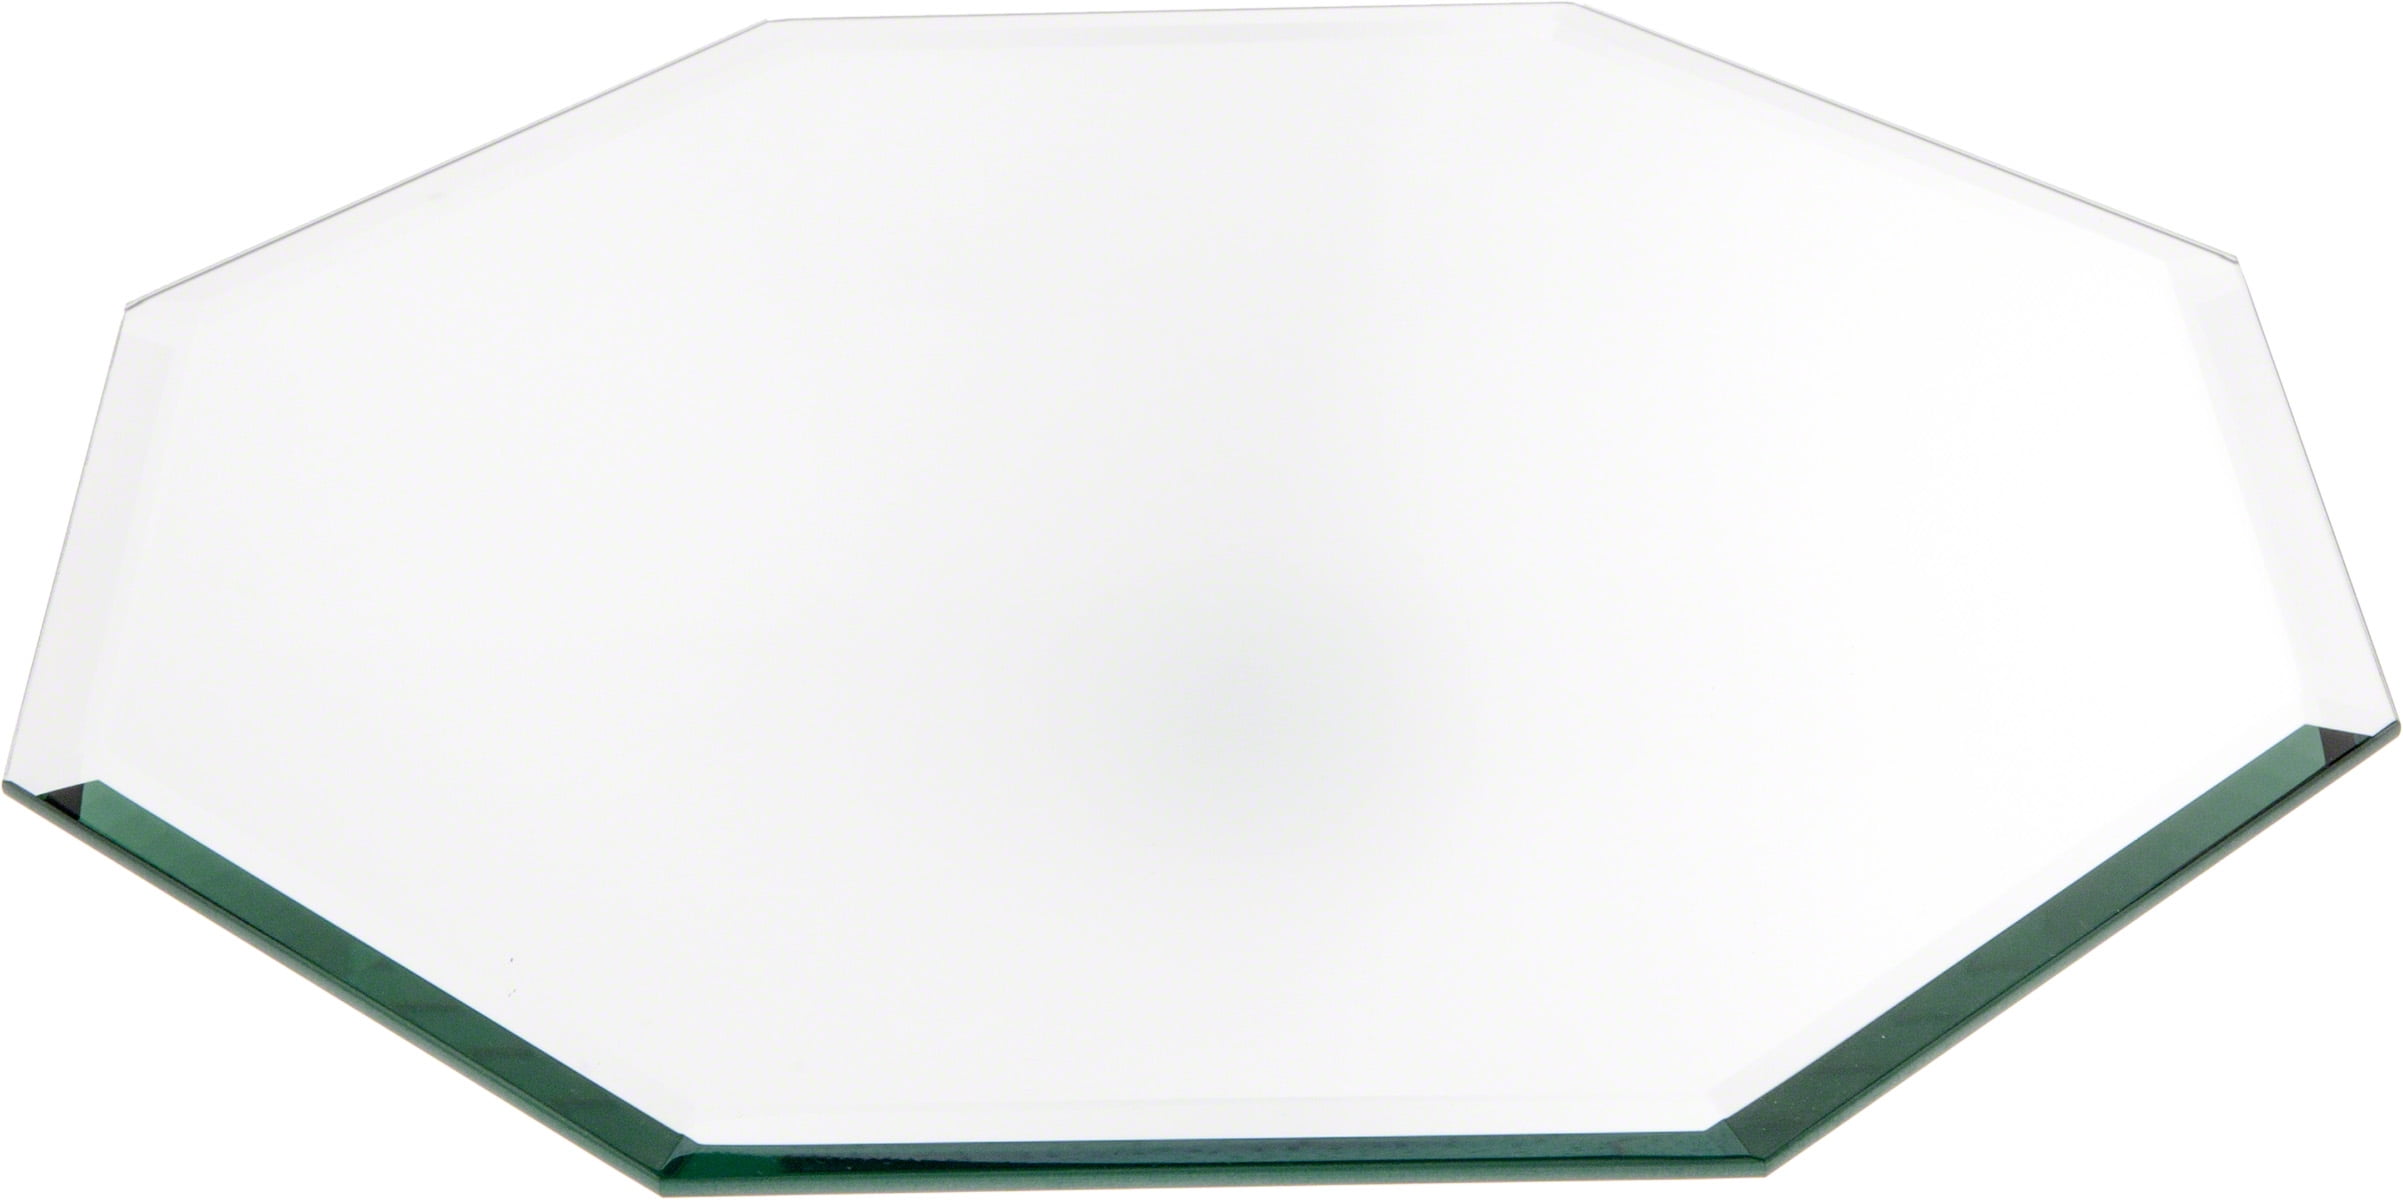 Plymor Round 3mm Beveled Glass Mirror 4 inch x 4 inch Pack of 3 